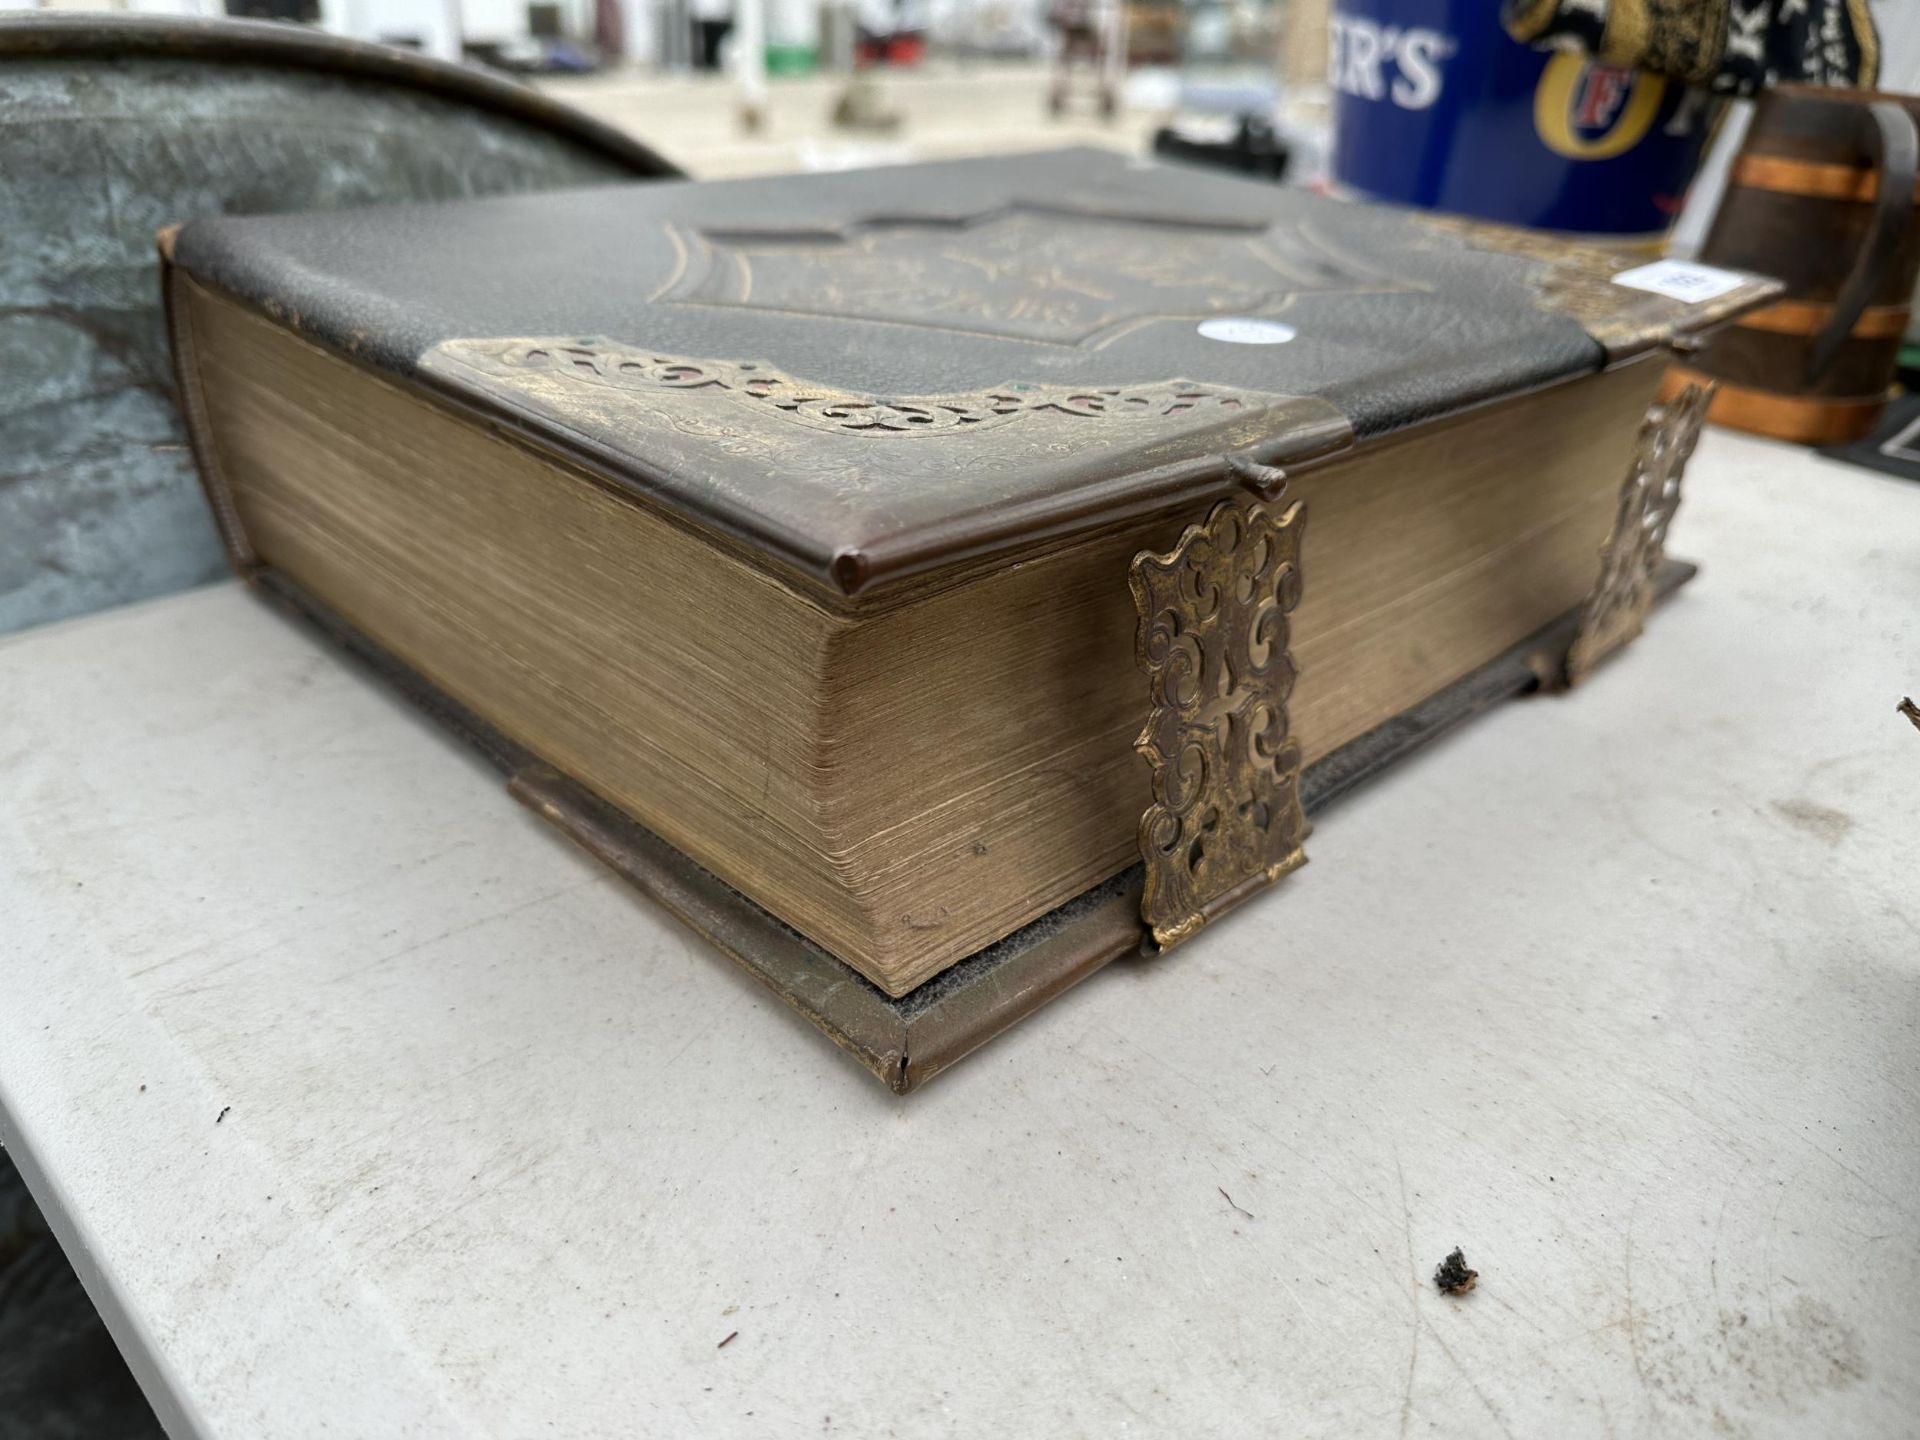 A VINTAGE LEATHER BOUND HOLY BIBLE WITH BRASS DETAIL - Image 4 of 4